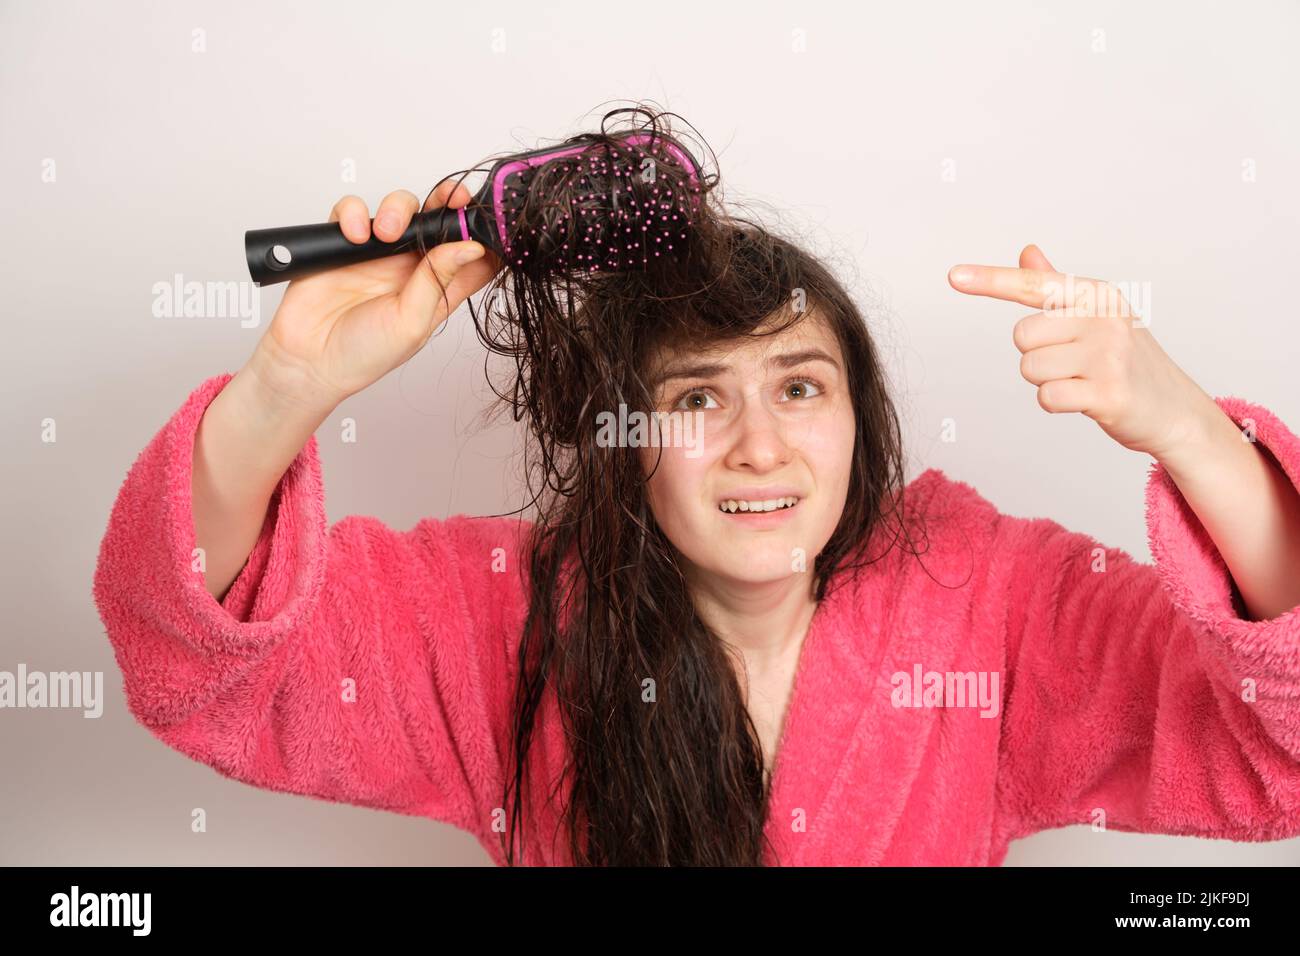 A woman tries to comb her tangled wet hair. Hair care at home, hair loss and section. Stock Photo